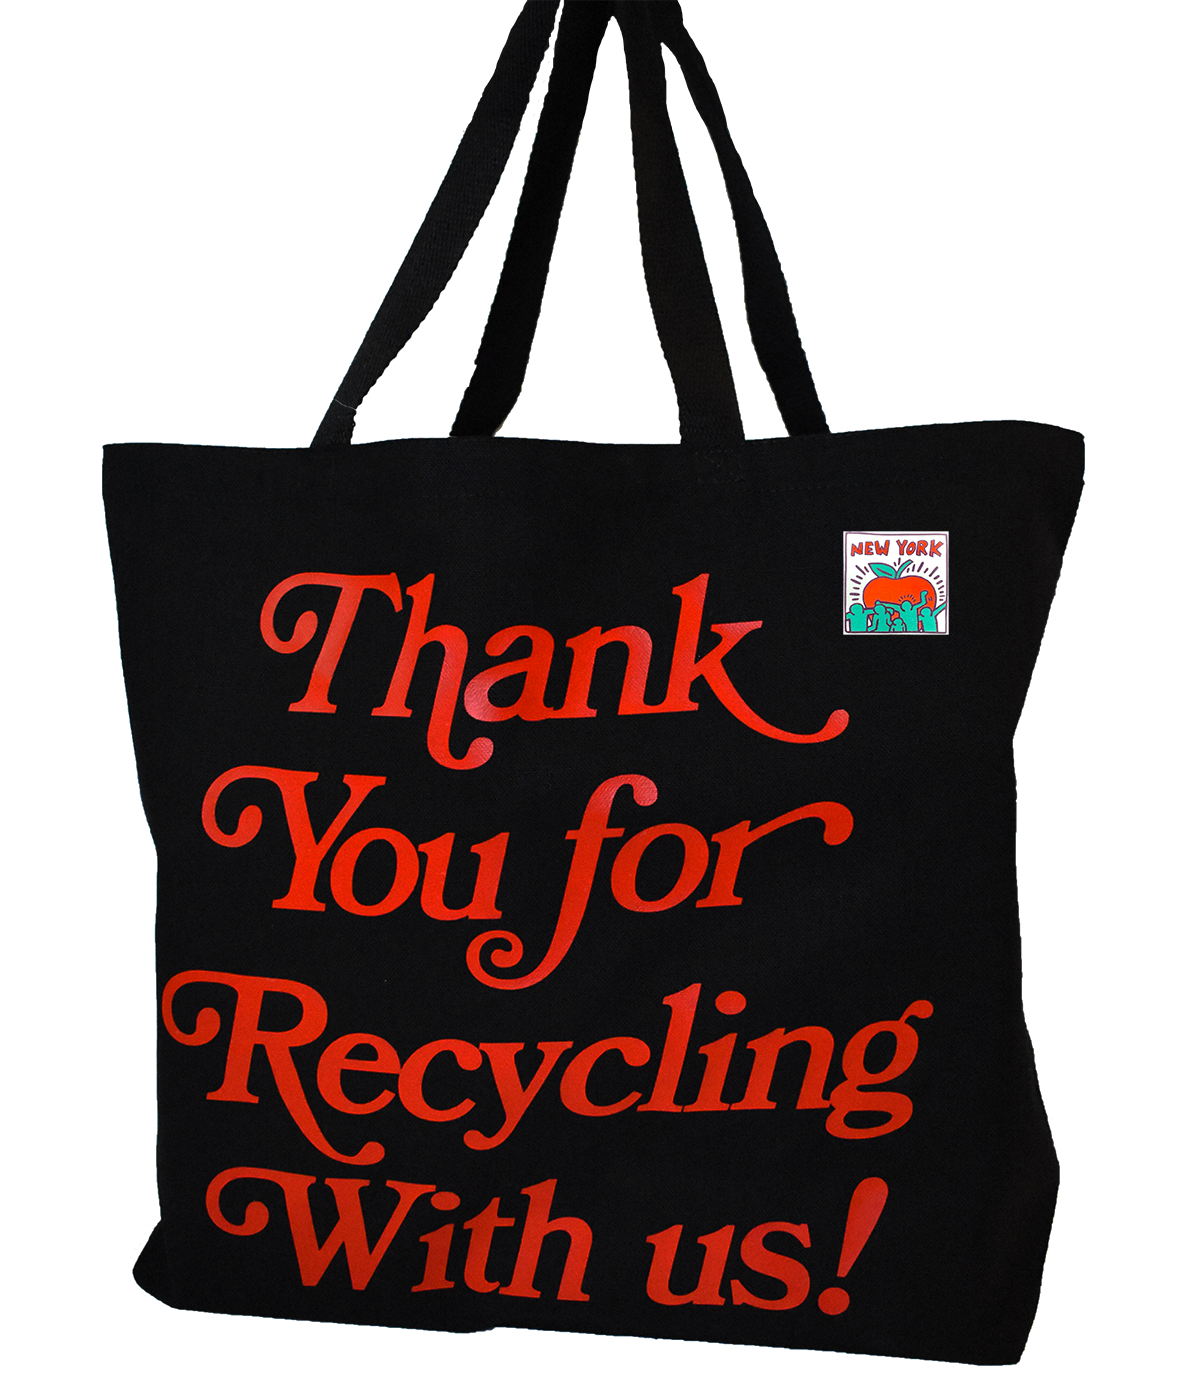 Thank You For Recycling With Us Jumbo Black Canvas Tote